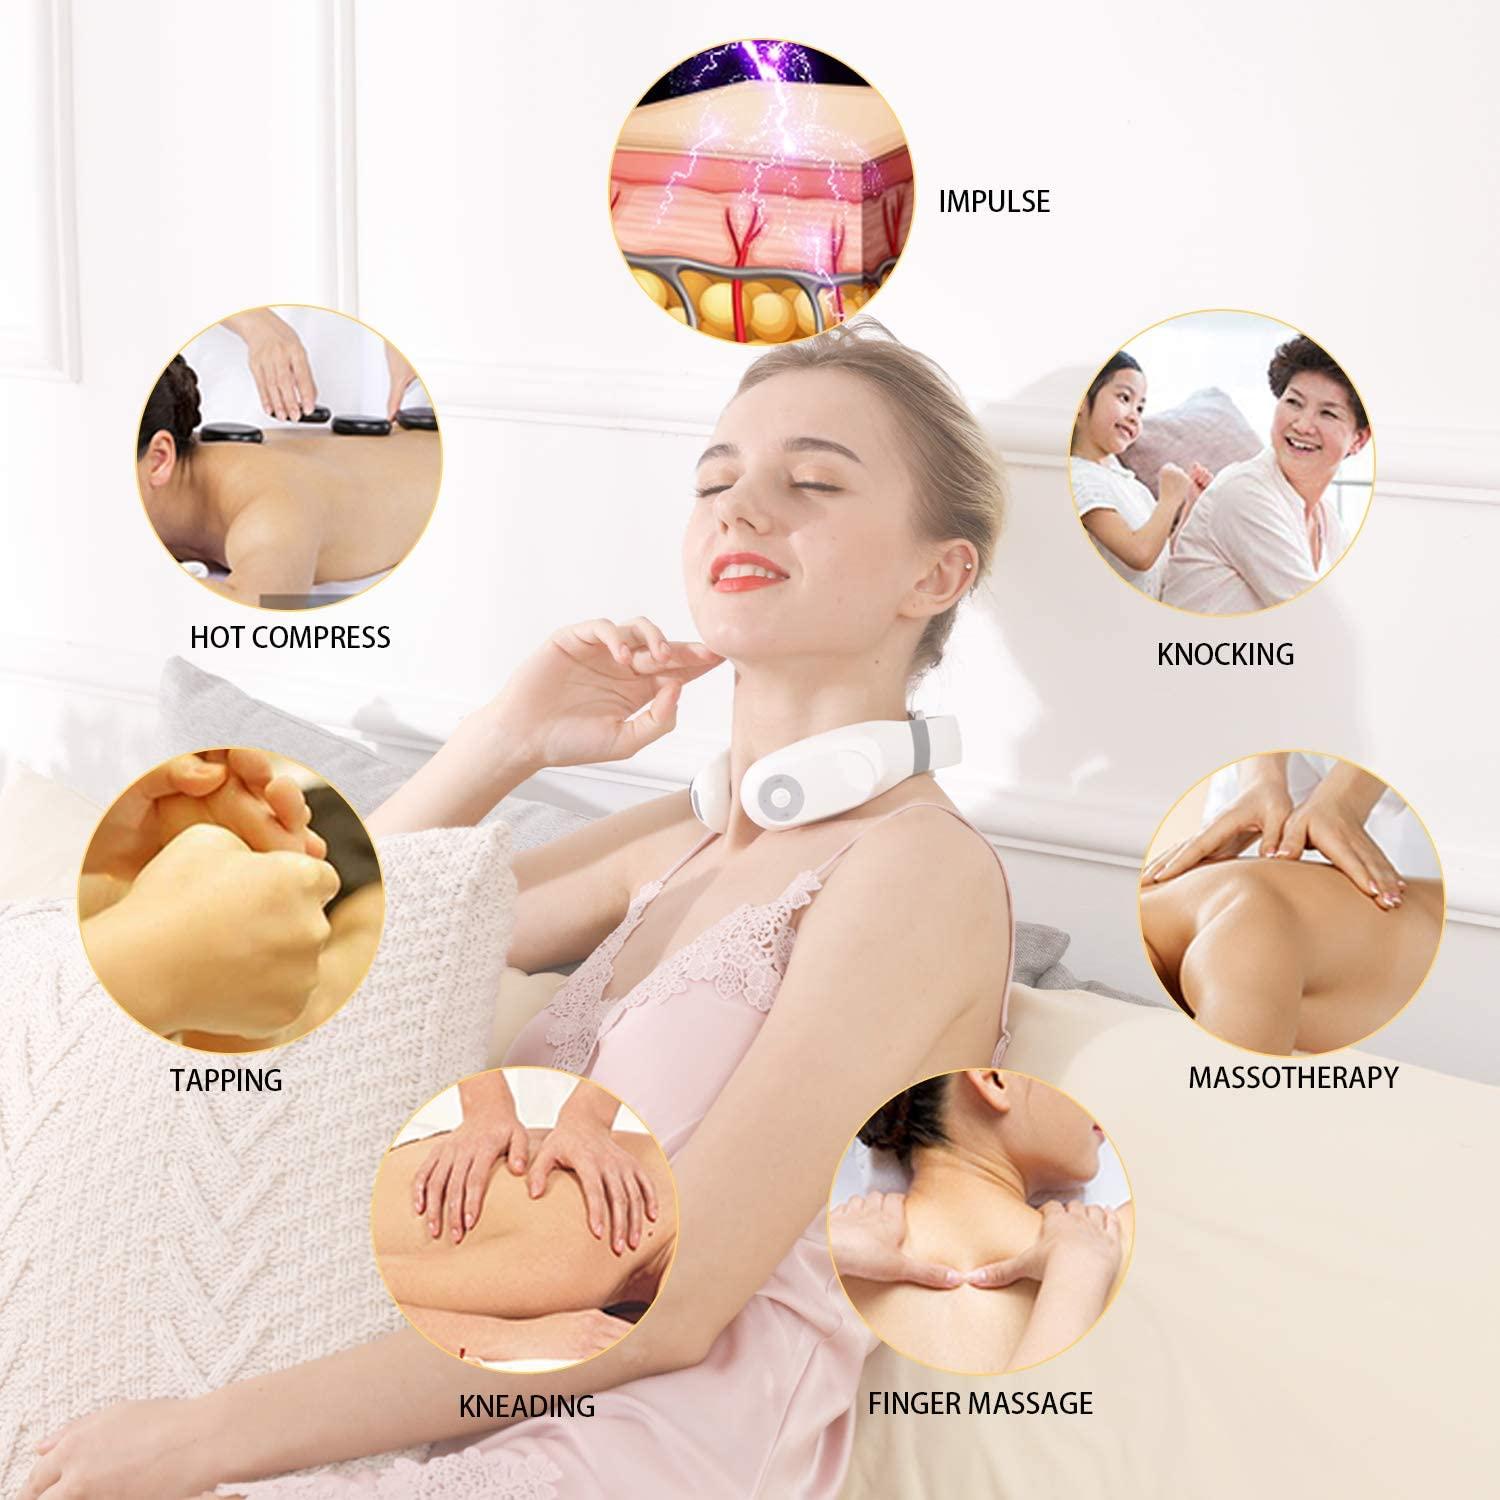 HEZHENG Neck Massager with Adjustable Heat, Electric Massager 3 Massage  Pads with Remote Control for…See more HEZHENG Neck Massager with Adjustable